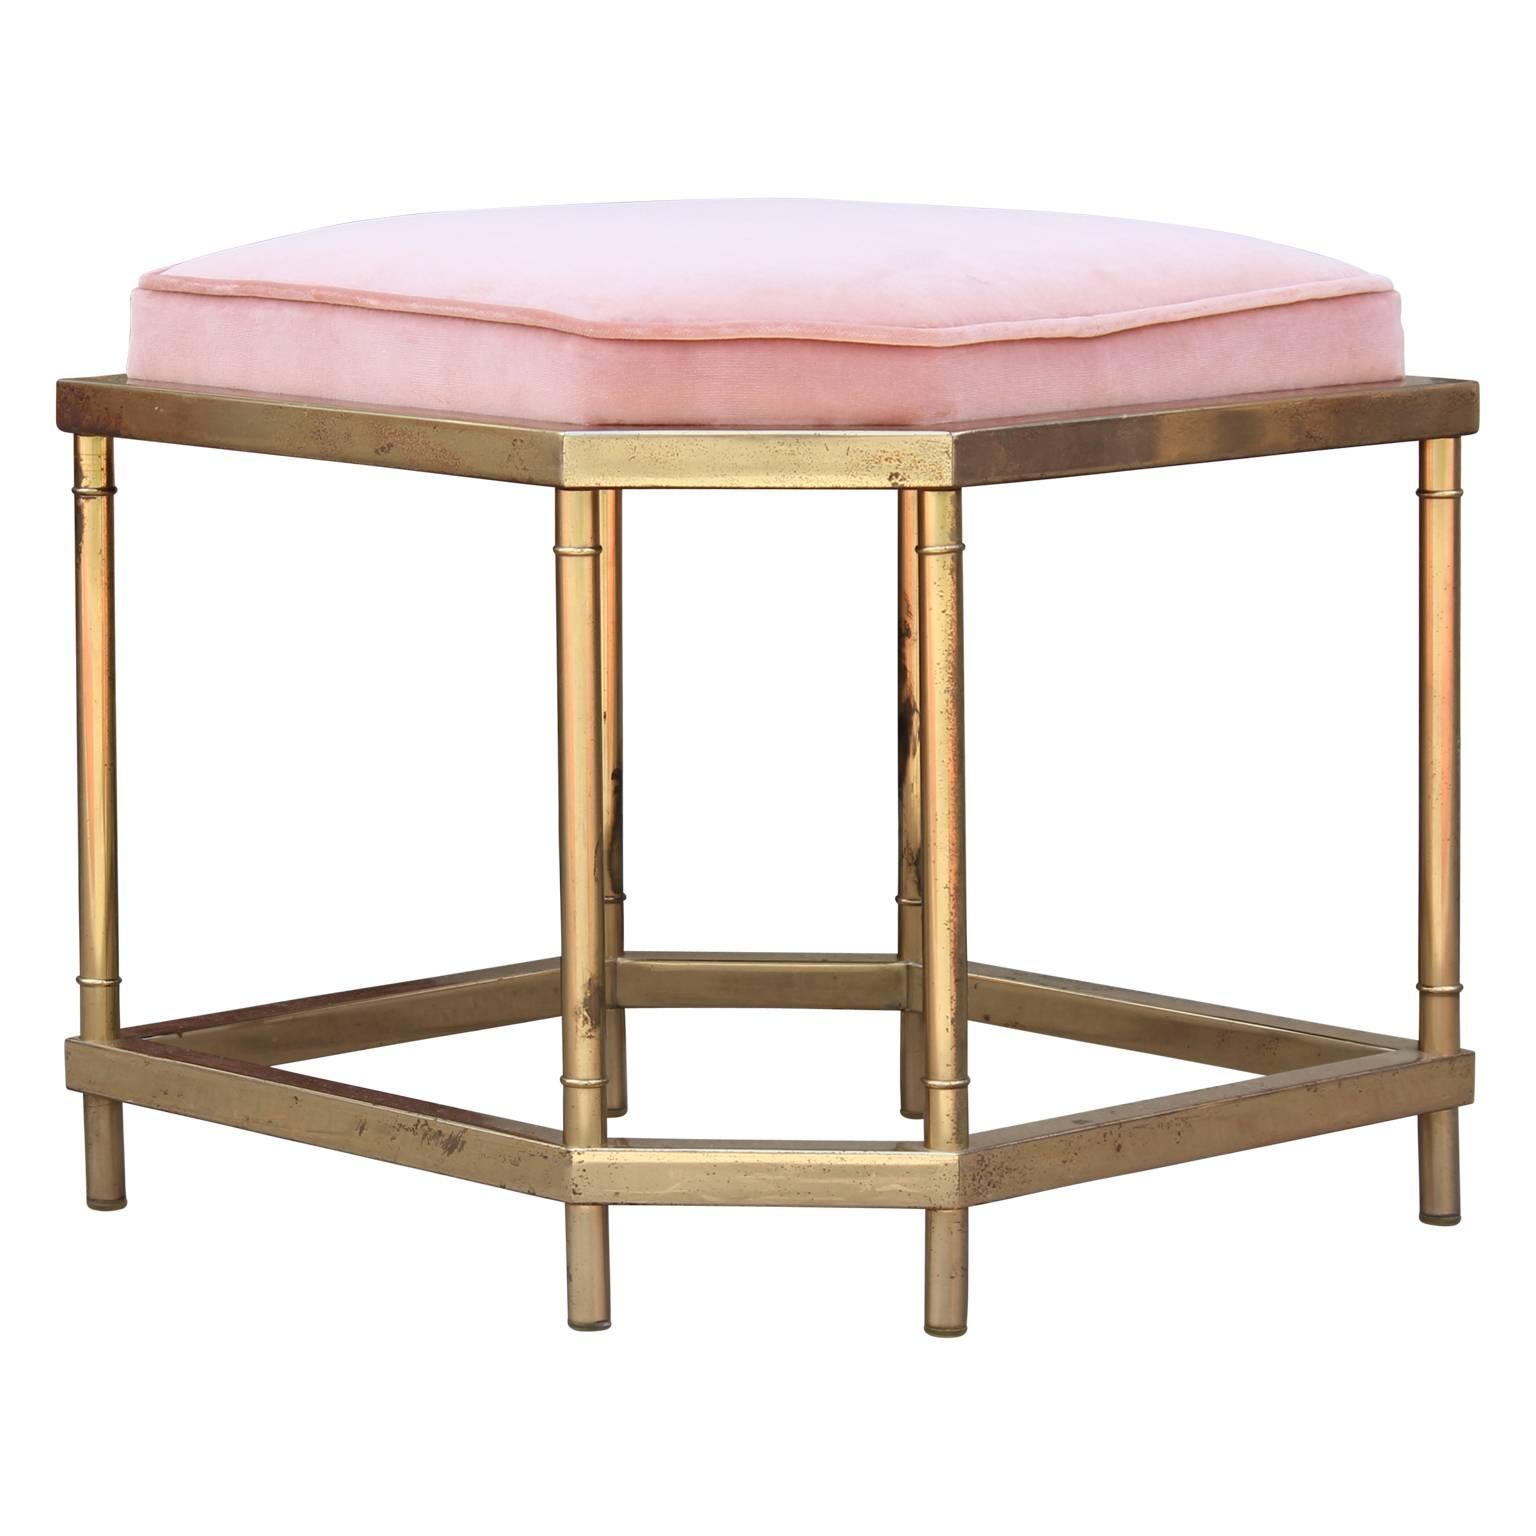 Pair of lux brass foot stools recently reupholstered in a lush pink Kravet velvet. The brass has a nice natural patina to it, consistent with age and use.